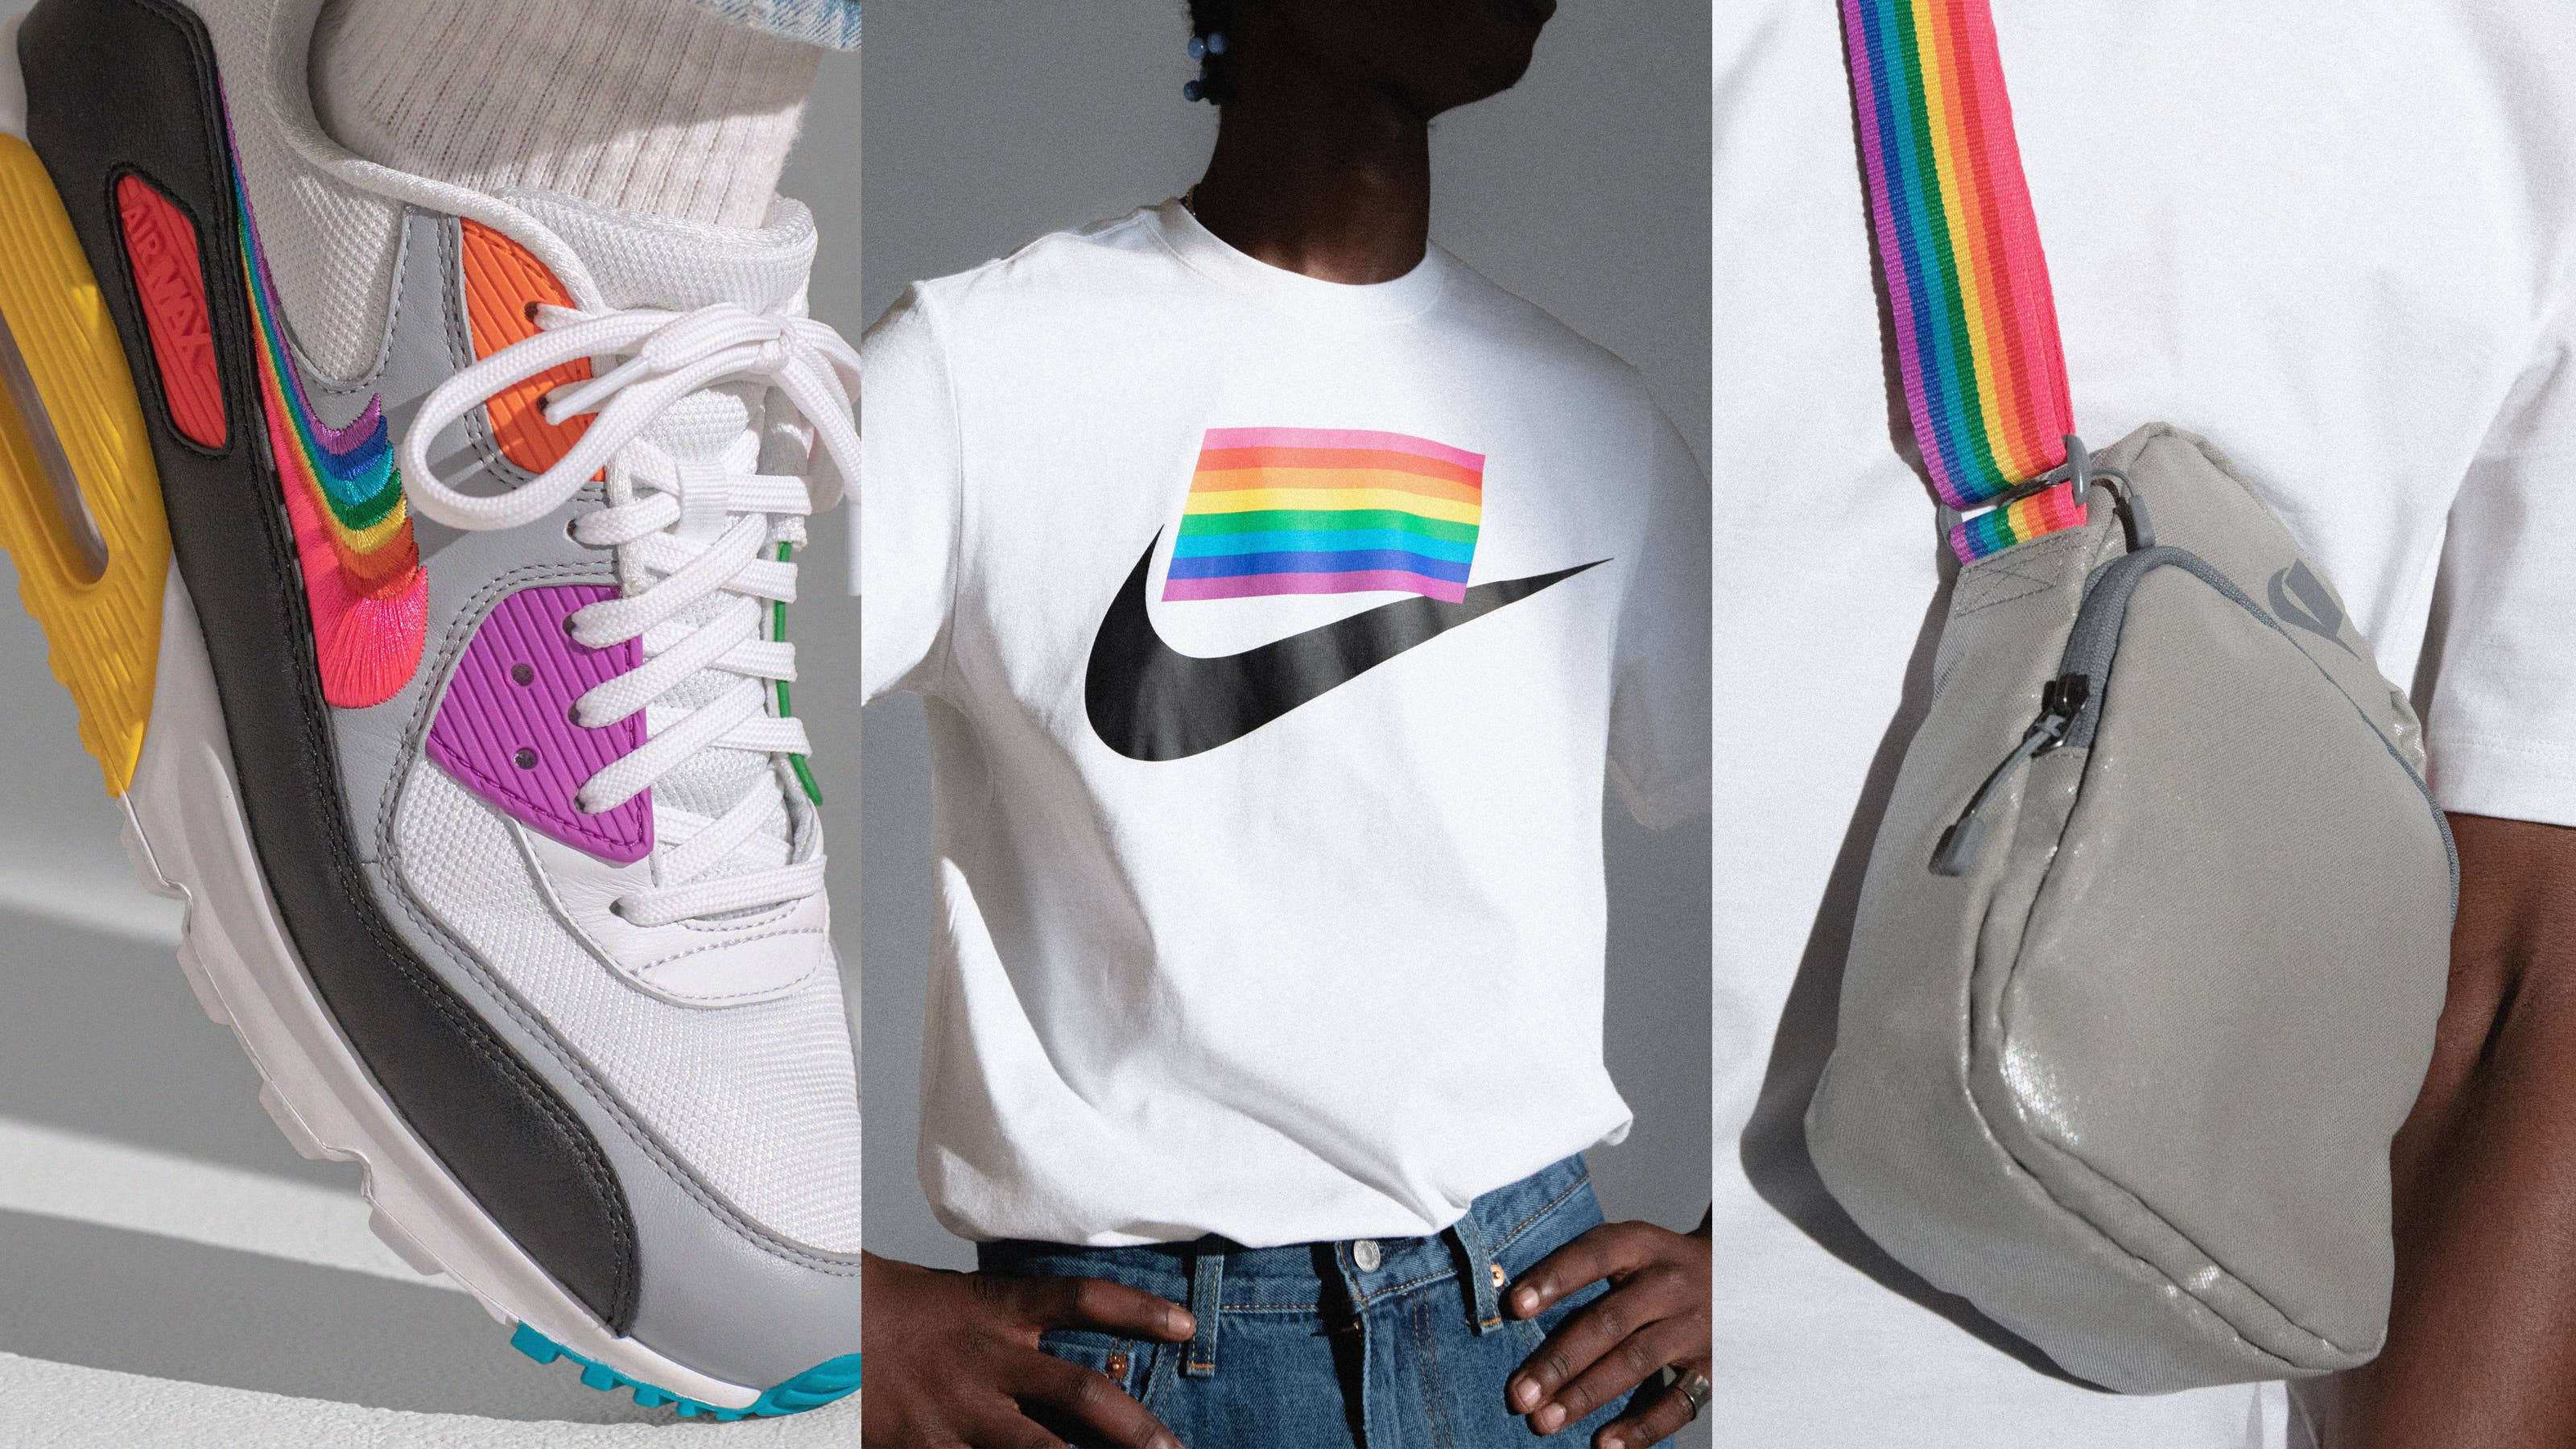 Nike's 2019 Is a Tribute to Pride Designer Gilbert Baker | Complex